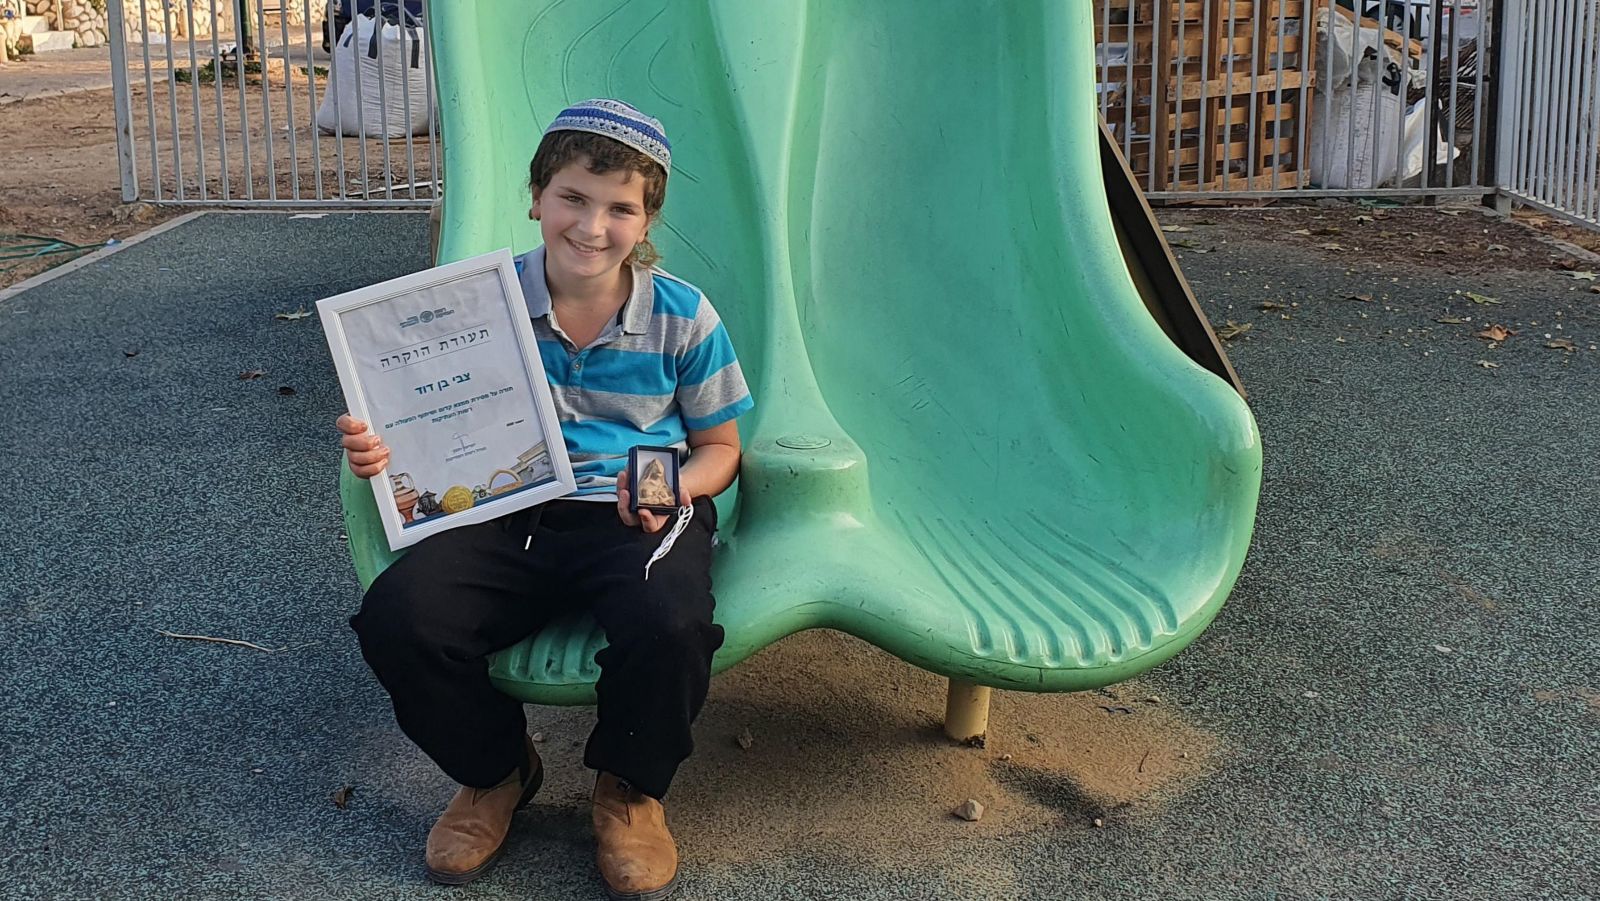 11-year-old Zvi Ben-David receives a certificate of appreciation for good citizenship for turning in his ancient figurine find. Photo by Oren Shmueli/Israel Antiquities Authority